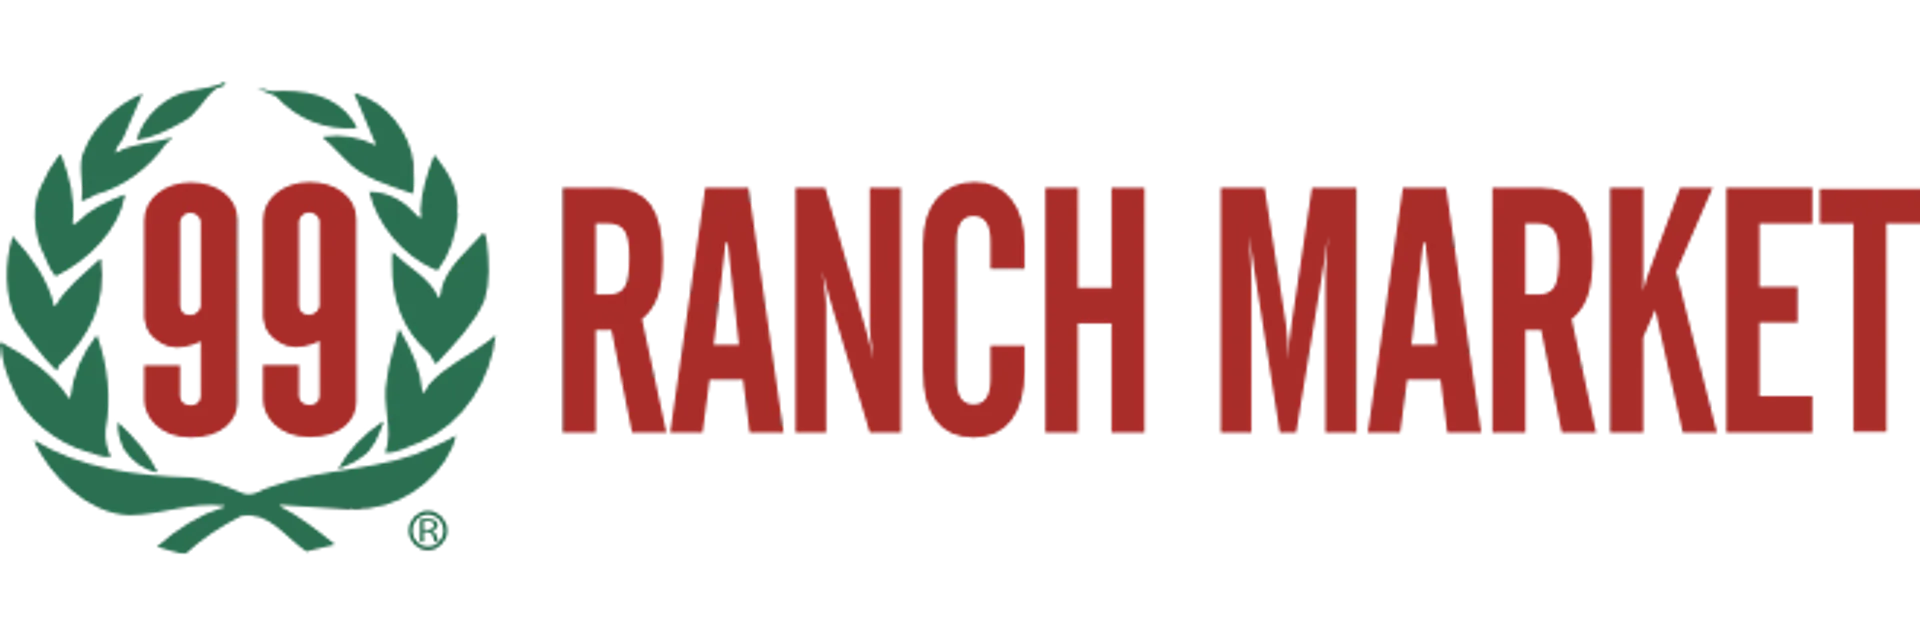 99 RANCH MARKET logo. Current weekly ad